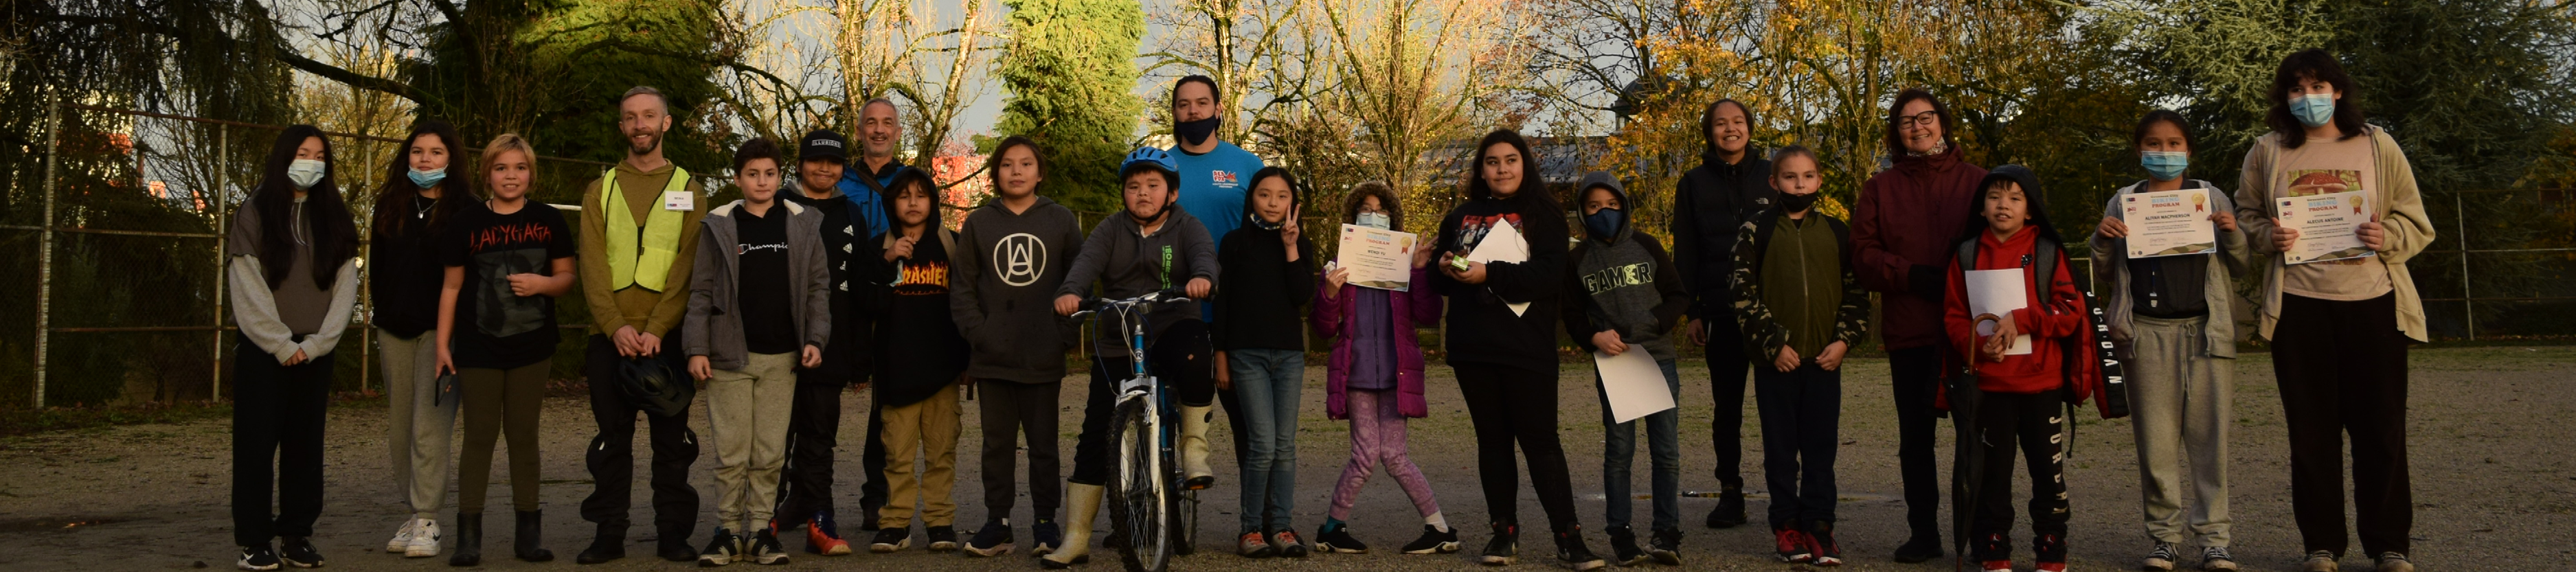 A group photo of students and instructors from Red Fox Healthy Living Society at a Ride Your Path Program graduation ceremony.